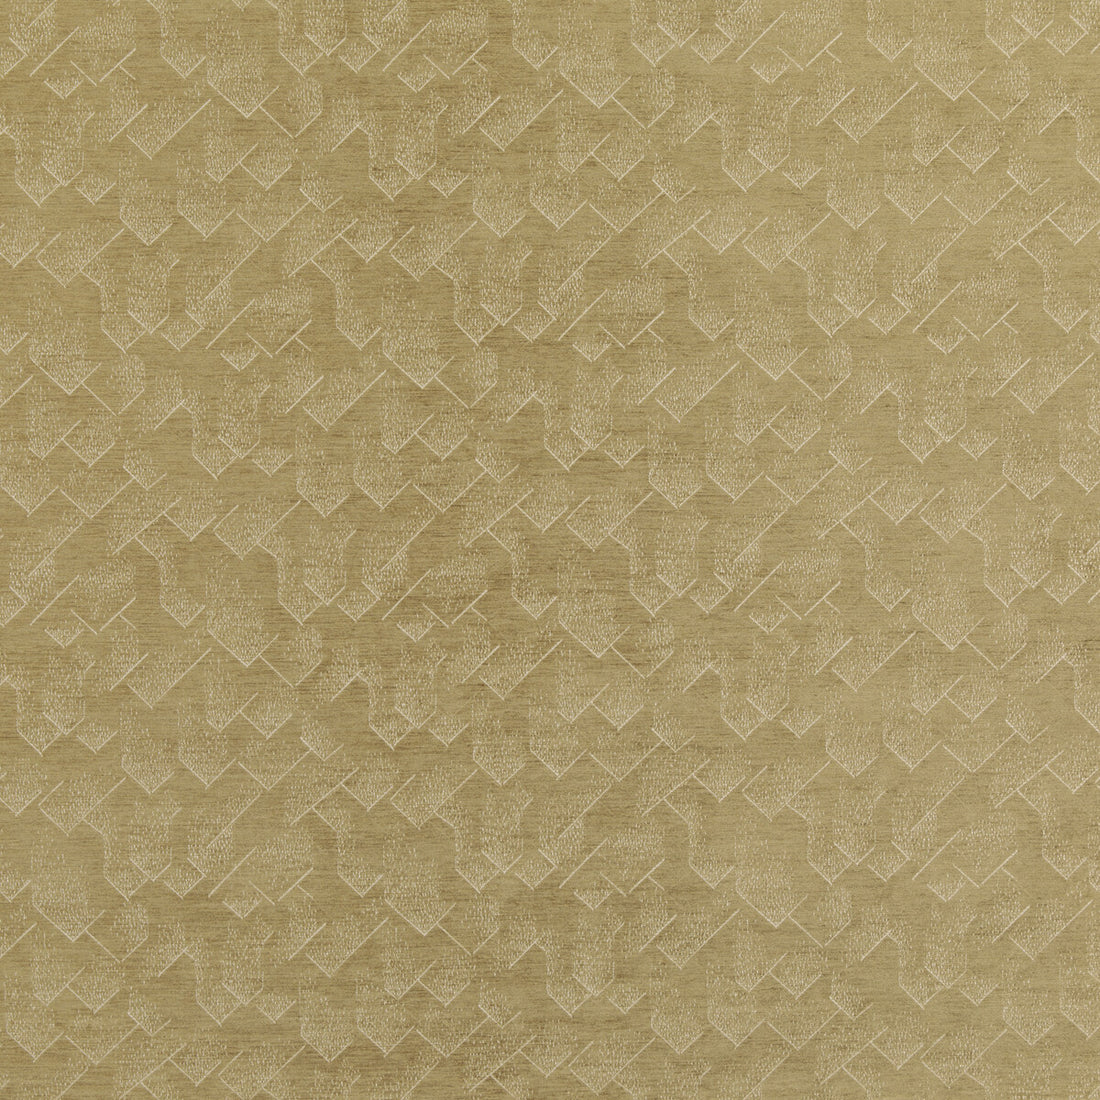 Brink fabric in bronze/tusk color - pattern GWF-3733.401.0 - by Lee Jofa Modern in the Kelly Wearstler IV collection